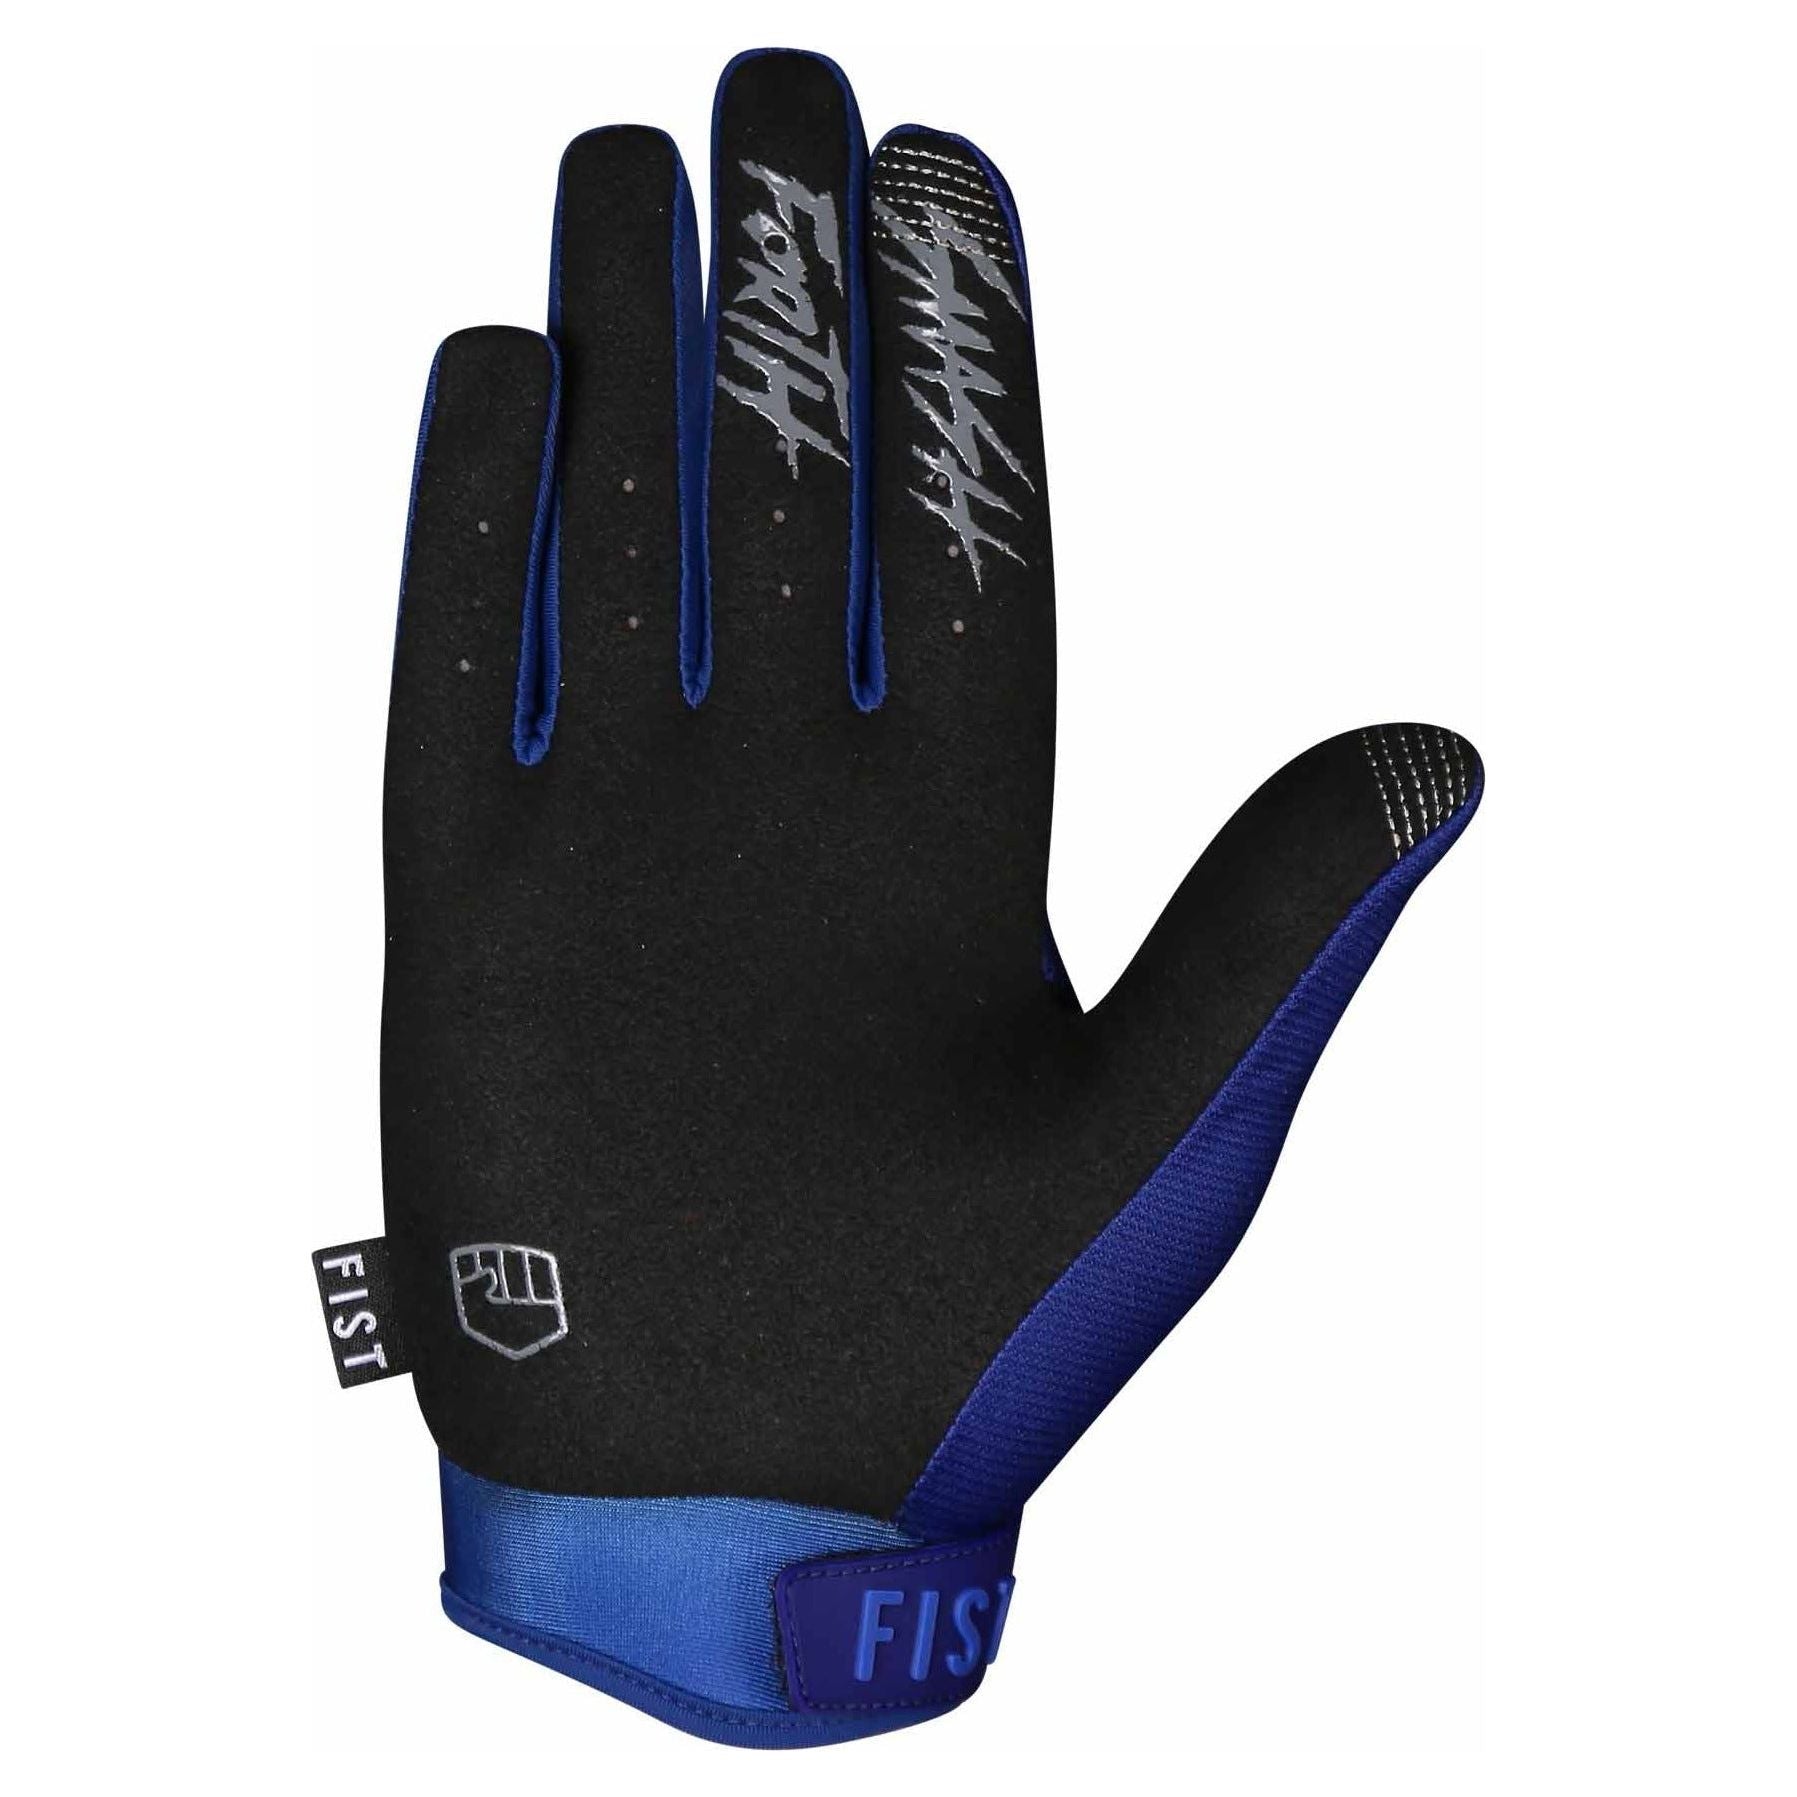 Fist Handwear Stocker Youth Strapped Glove - Youth M - Blue Stocker - Image 2